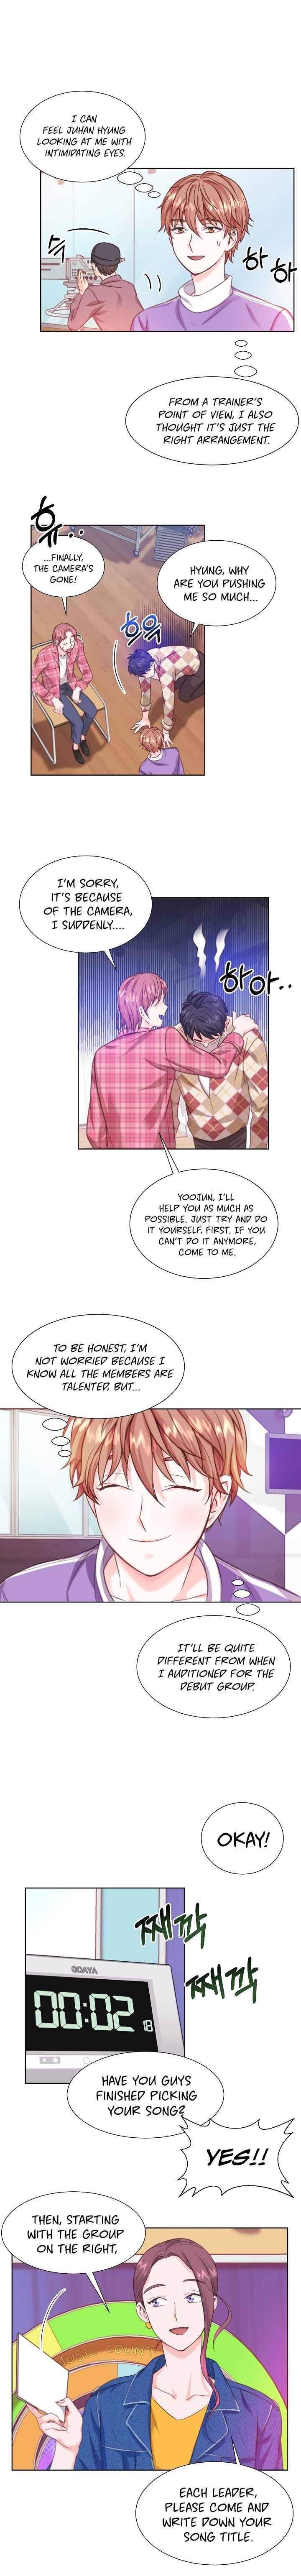 Once Again Idol Chapter 11 - Page 5